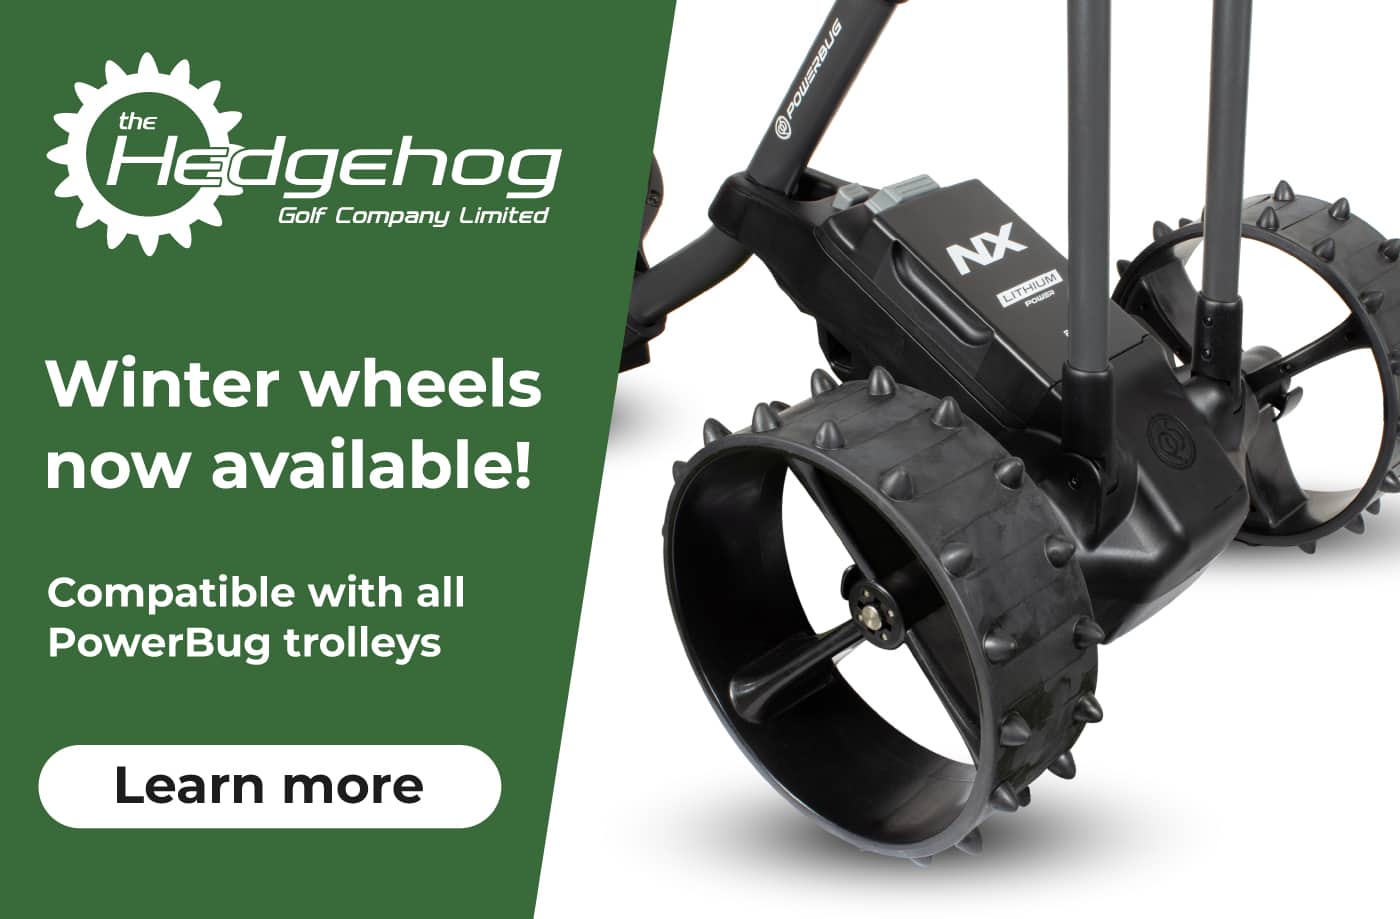 Hedgehog Winter Wheels now available!